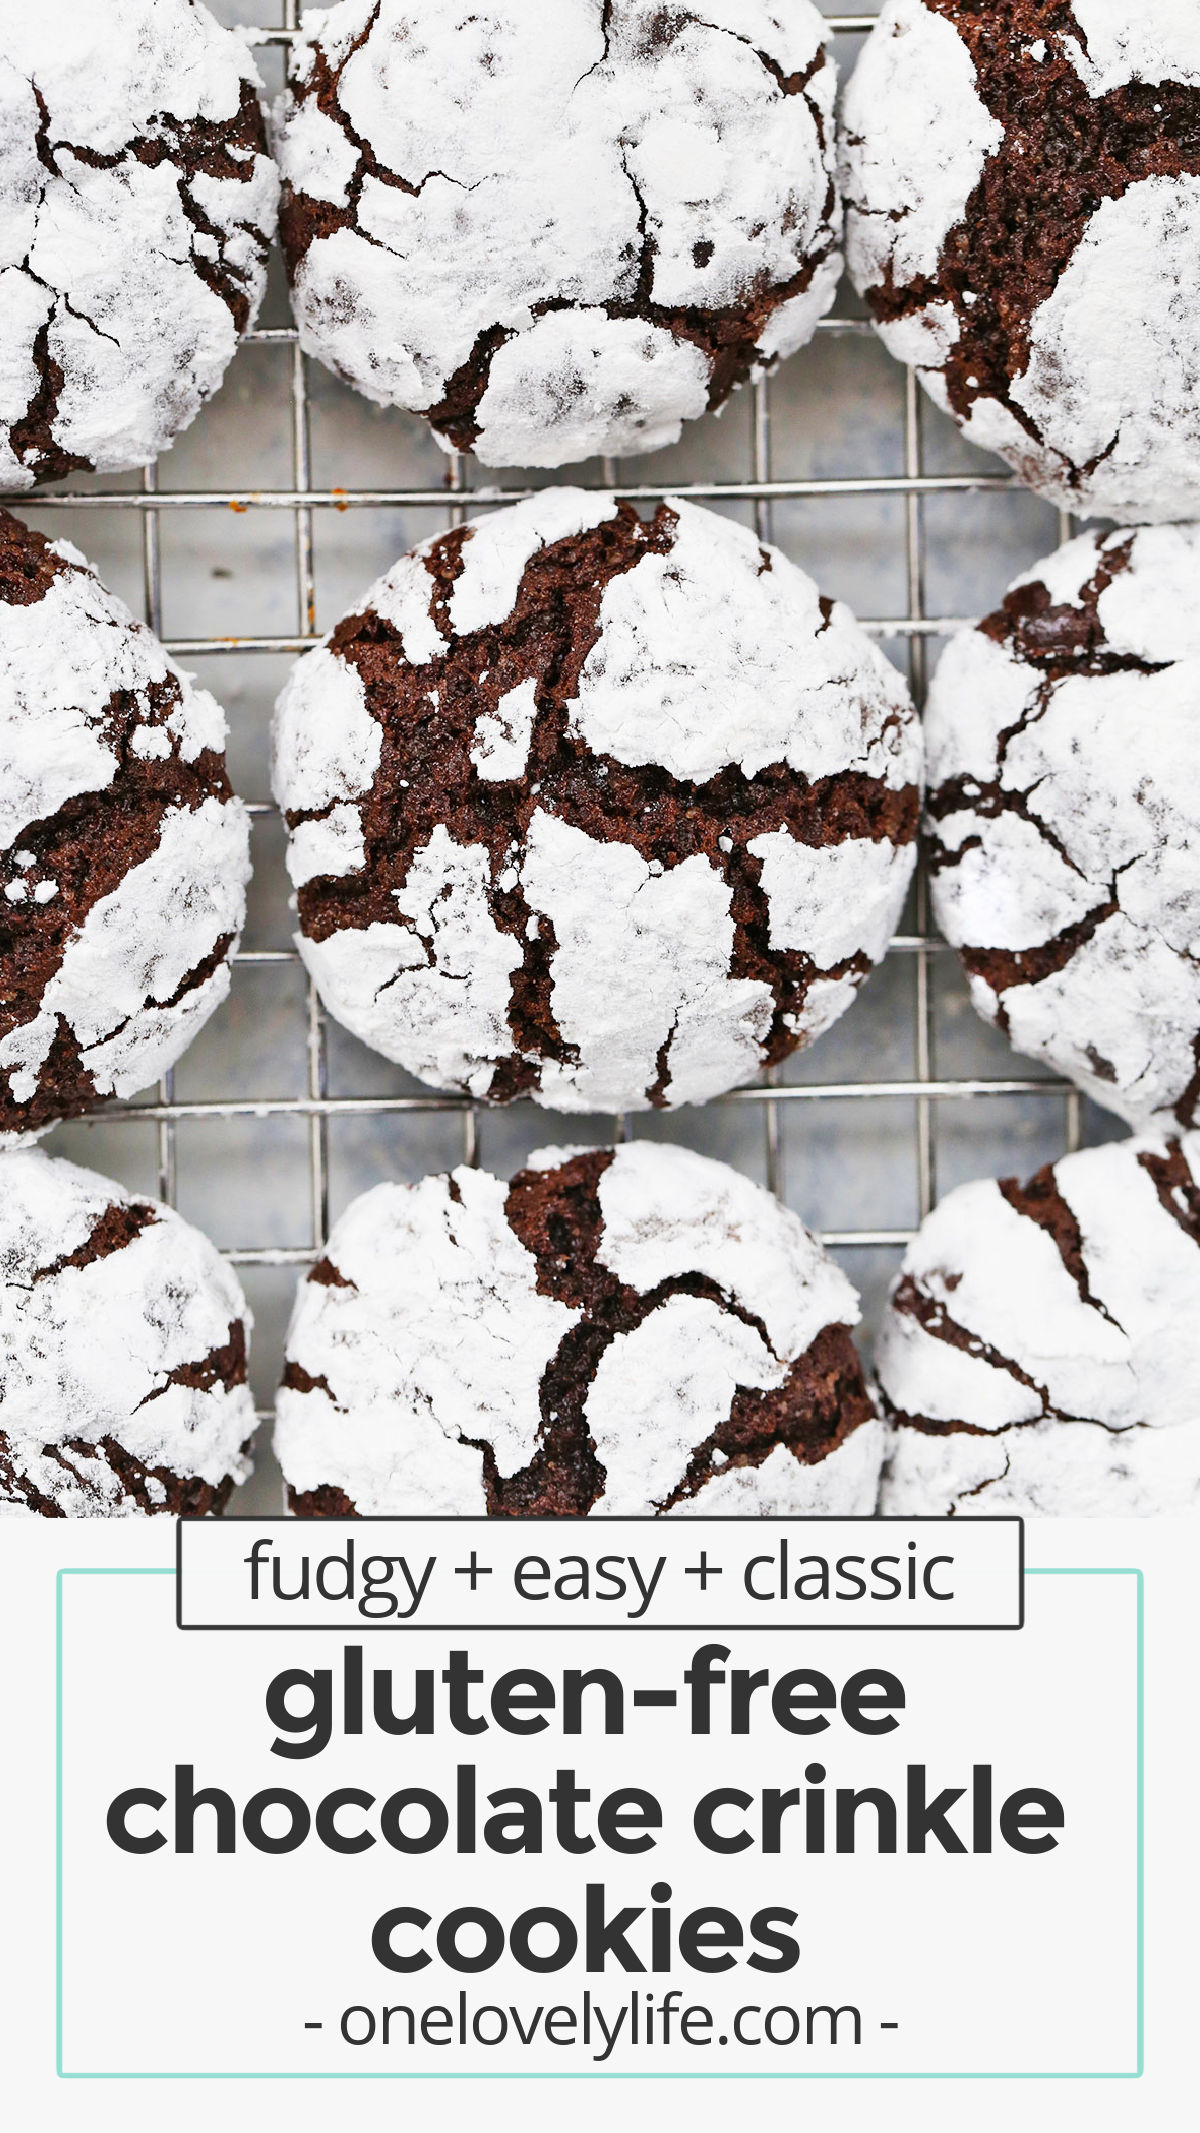 Gluten-Free Chocolate Crinkle Cookies - These gorgeous gluten-free crinkle cookies are ultra-fudgy and absolutely delicious! Perfect for the holidays or your next chocolate craving. (Gluten-Free & Dairy Free) // Crinkle Cookies Recipe // Chocolate Crinkle Cookies Recipe // Gluten Free Christmas Cookies //